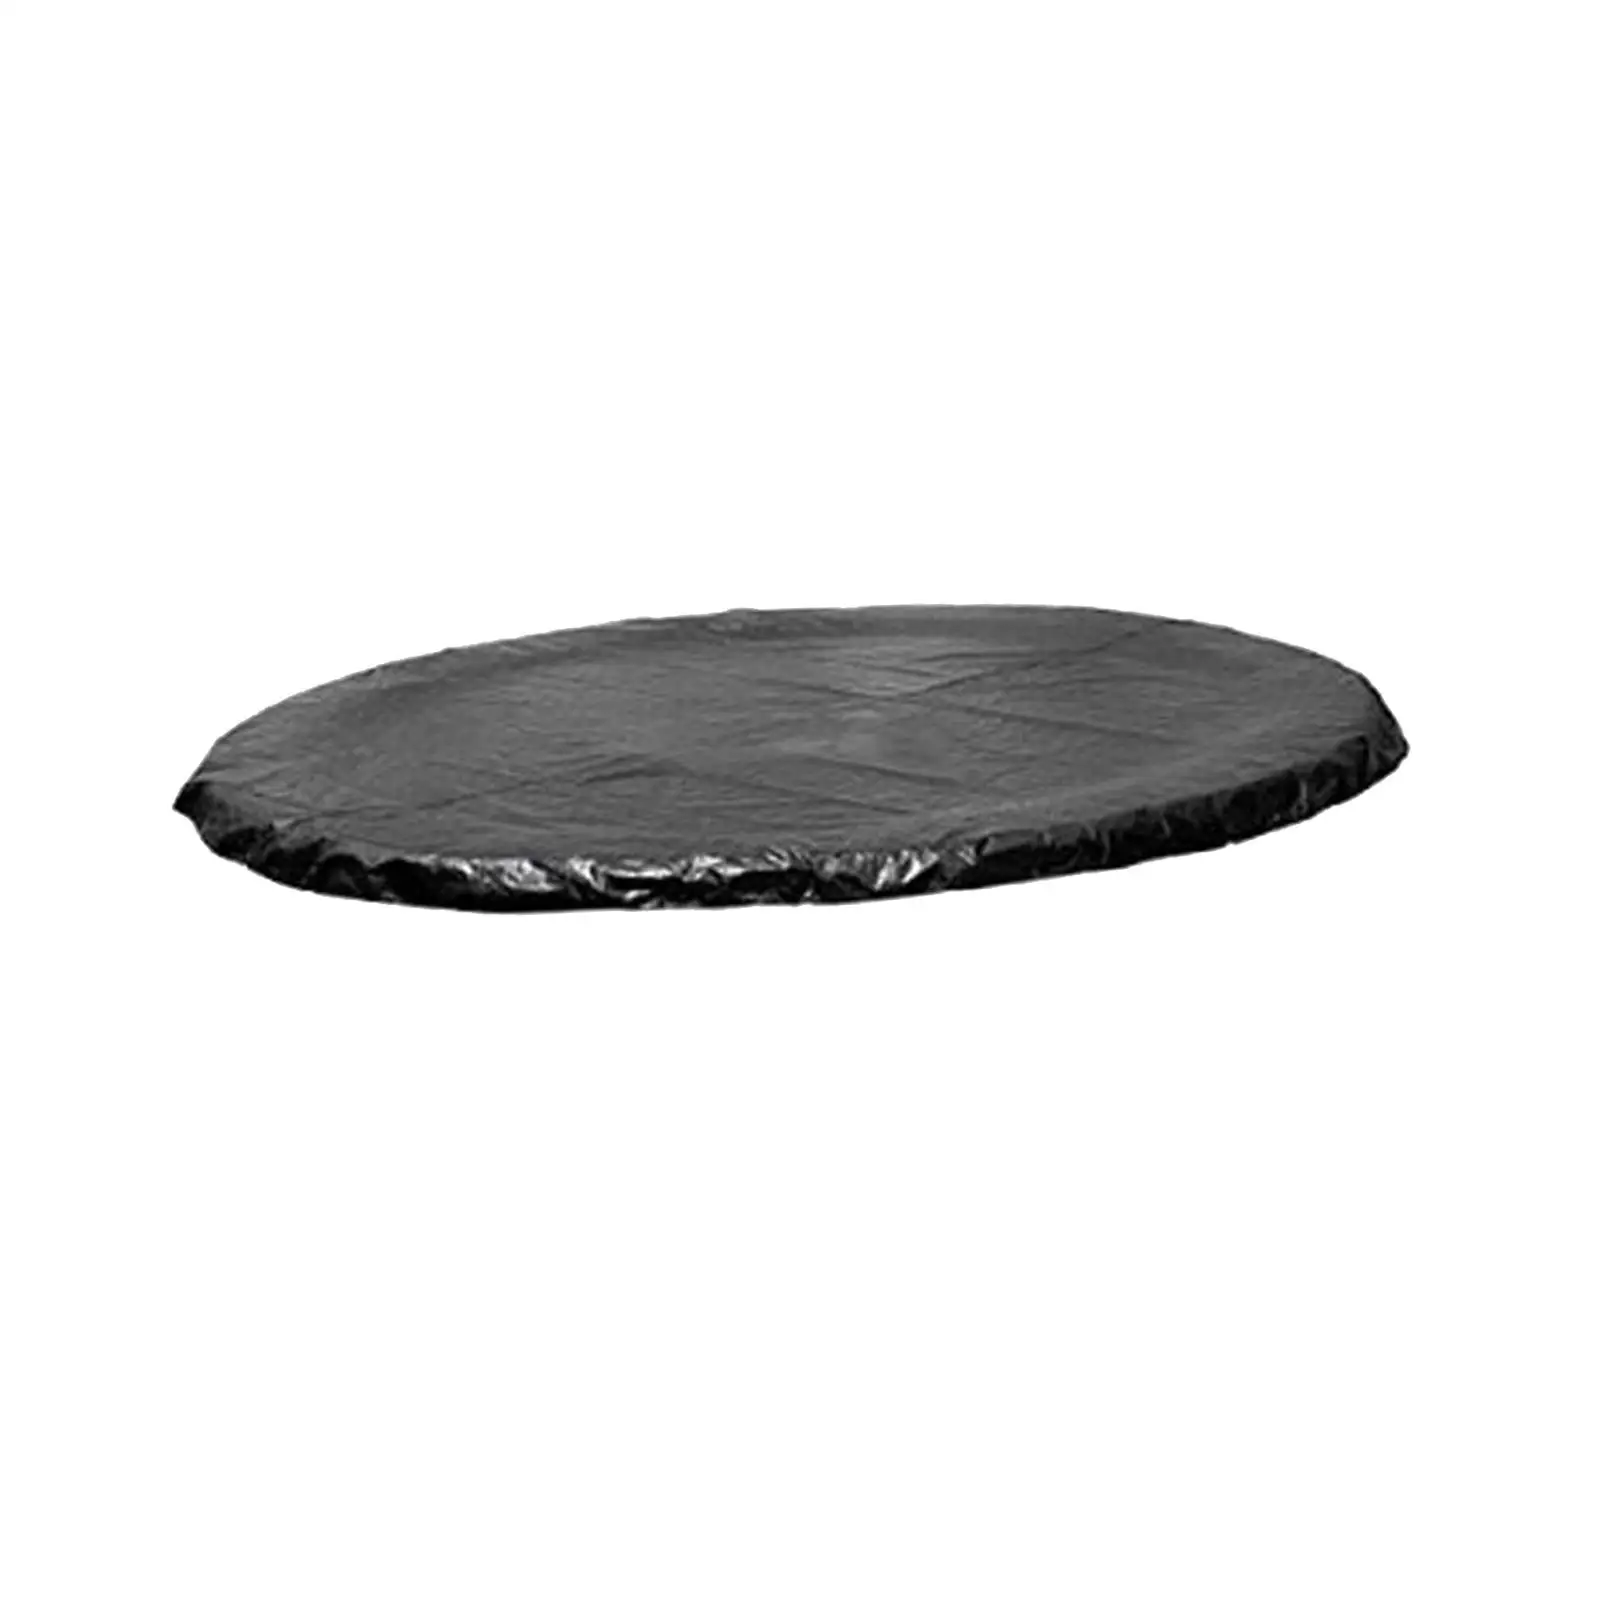 Trampoline Protective Cover Weather and Rain Cover Sturdy Accessory Easily Install Water Leakage Designed Windproof Outdoor